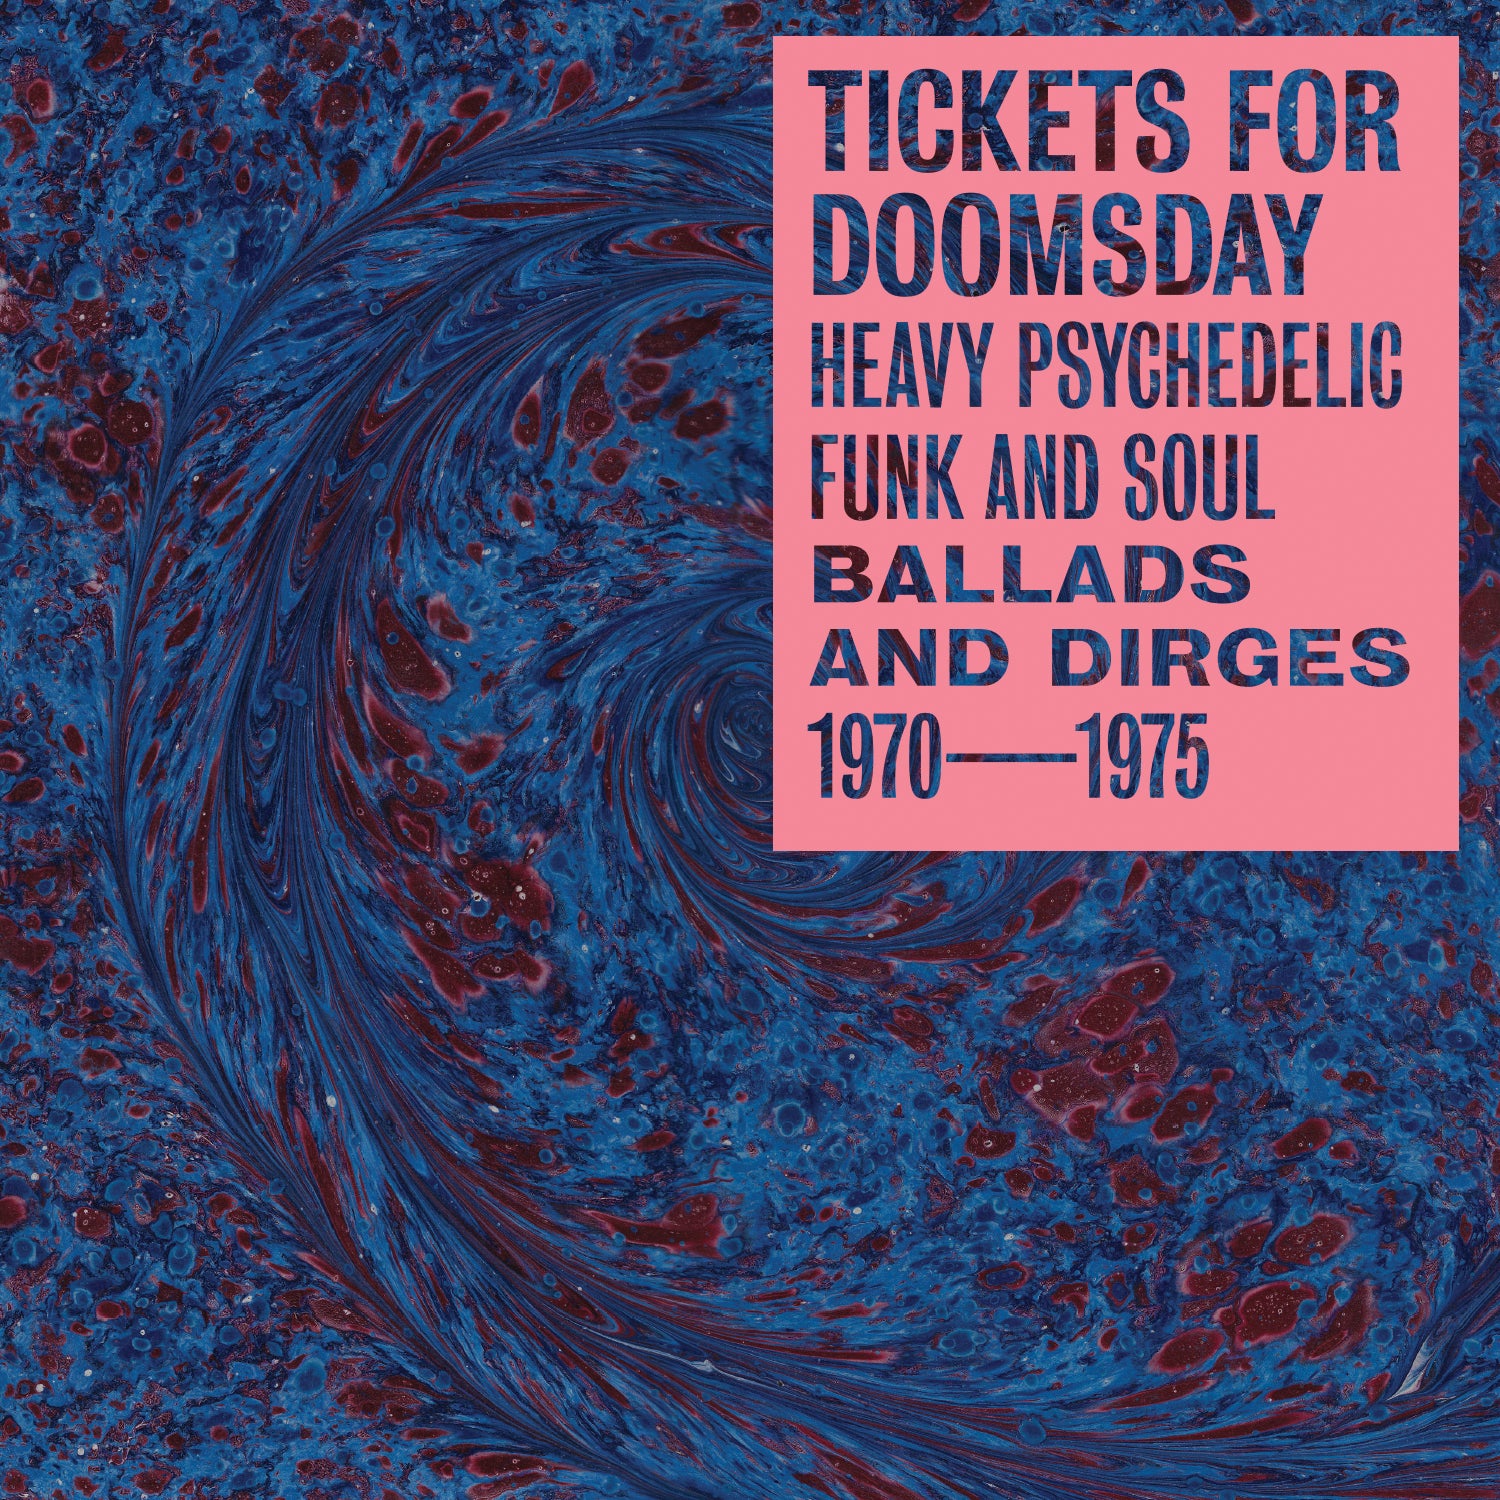 Tickets for Doomsday: Heavy Psychedelic Funk, Soul Ballads & Dirges, 1970-1975